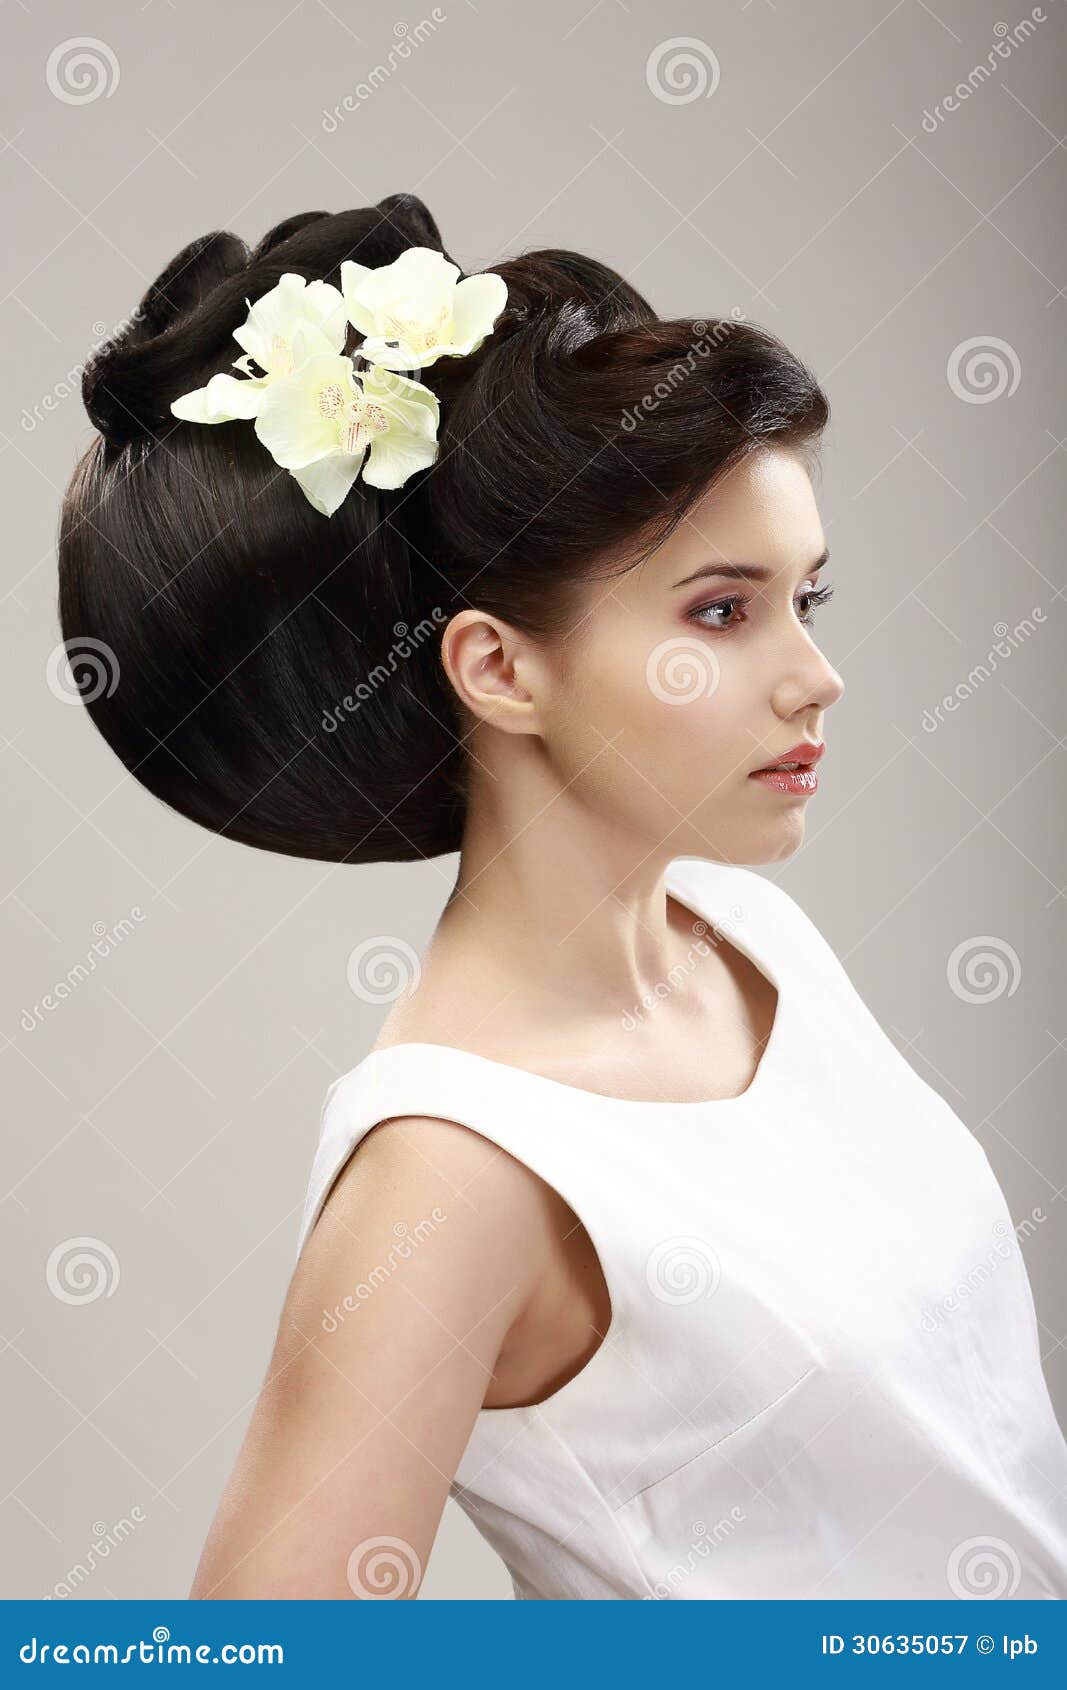 Woman With Futuristic Hairstyle And Orchid Stock Image ...